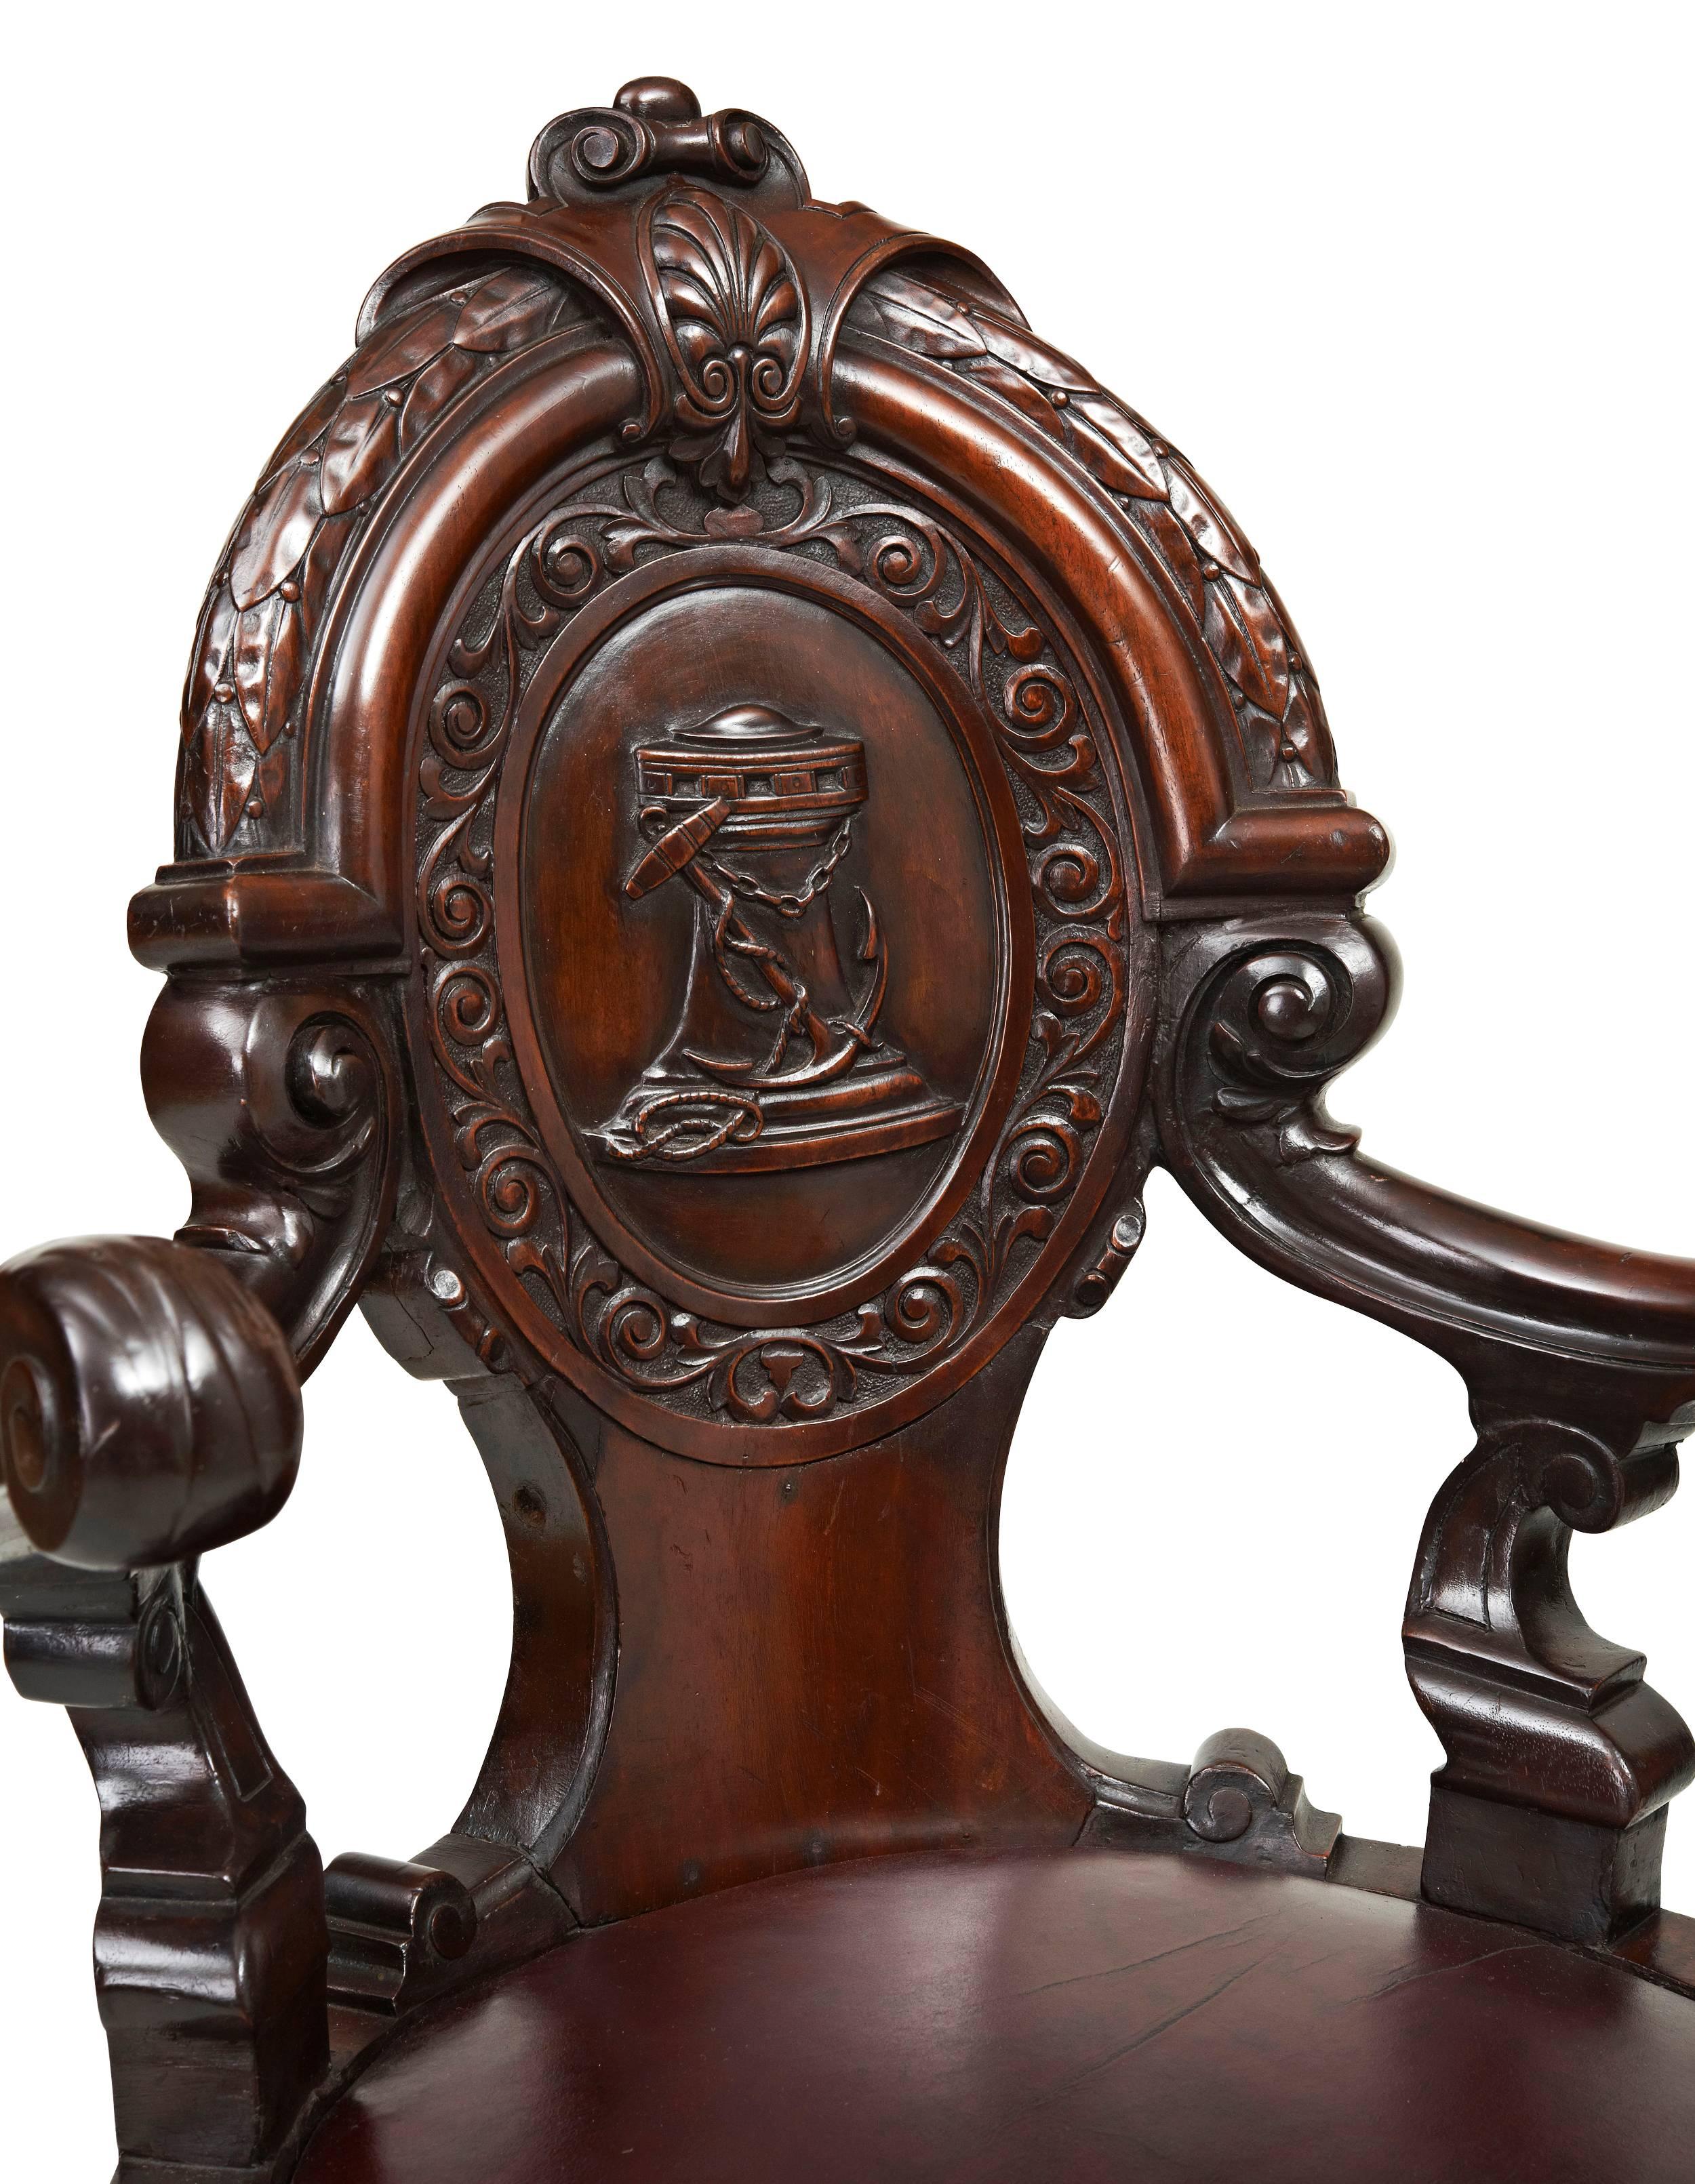 The quality of this mahogany Ship’s Chair is exceptional and it stands out from many that you see. It has strong carving with acanthus leaves to the arms, rope twists to the seat edge and leg columns. The carving to the oval back is of a fouled